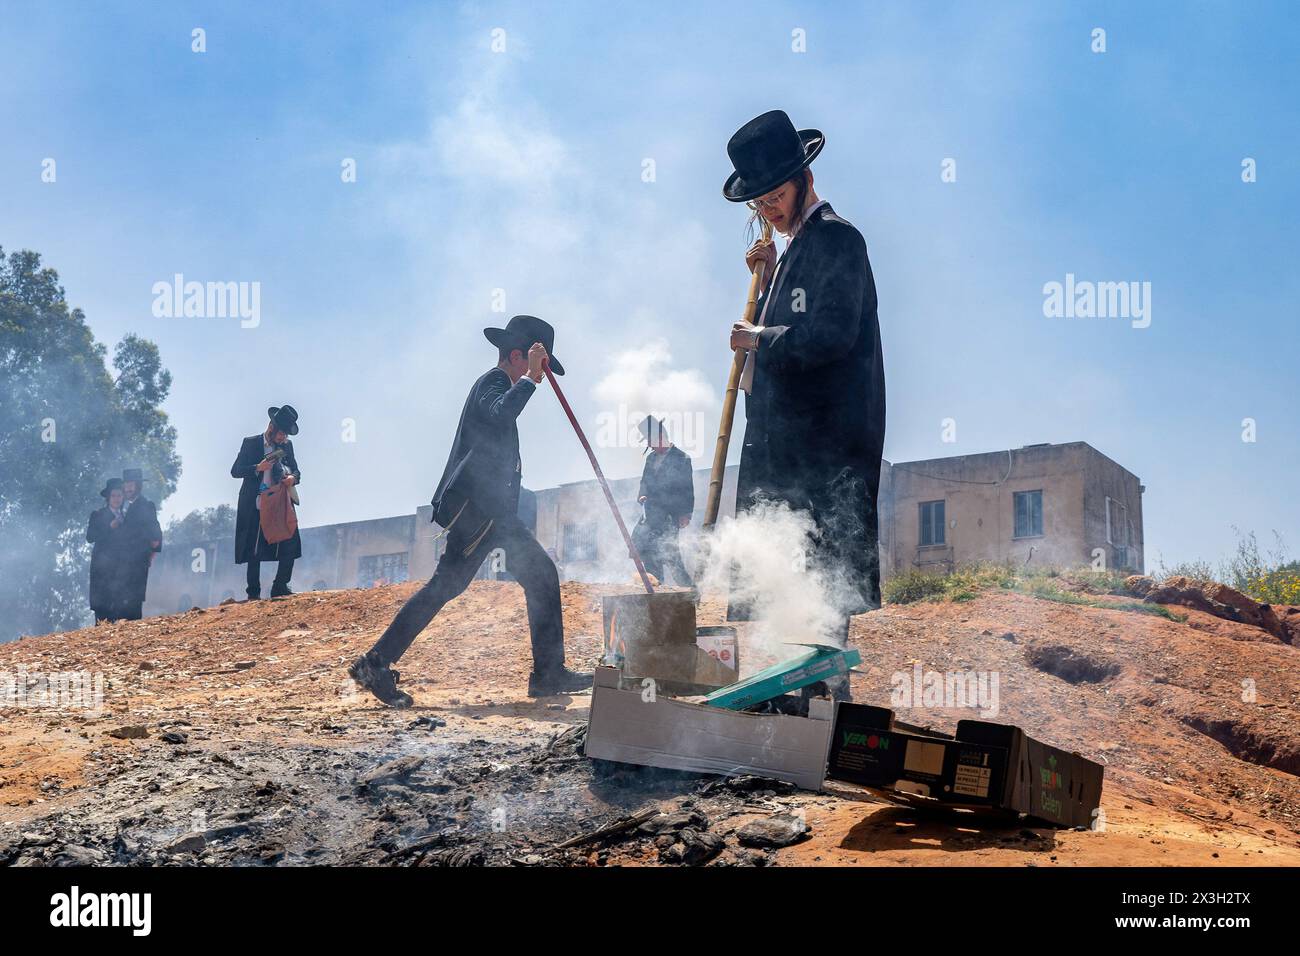 April 22, 2024, Bnei Brak, Israel: Young Jewish boys set up their private small fire. During the Biur Chametz, religious Jews fulfill their obligation to inspect their homes for any leaven and eliminate it before the night of Passover. In ultra-Orthodox cities in Israel, fires are set up in major locations in the city for this purpose, where people bring their bread leftovers to burn the leaven. During the seven days of Passover, they are prohibited from eating or possessing any leaven, symbolizing the dough the Israelites did not have time to allow to rise before the Exodus from Egypt. Biur C Stock Photo